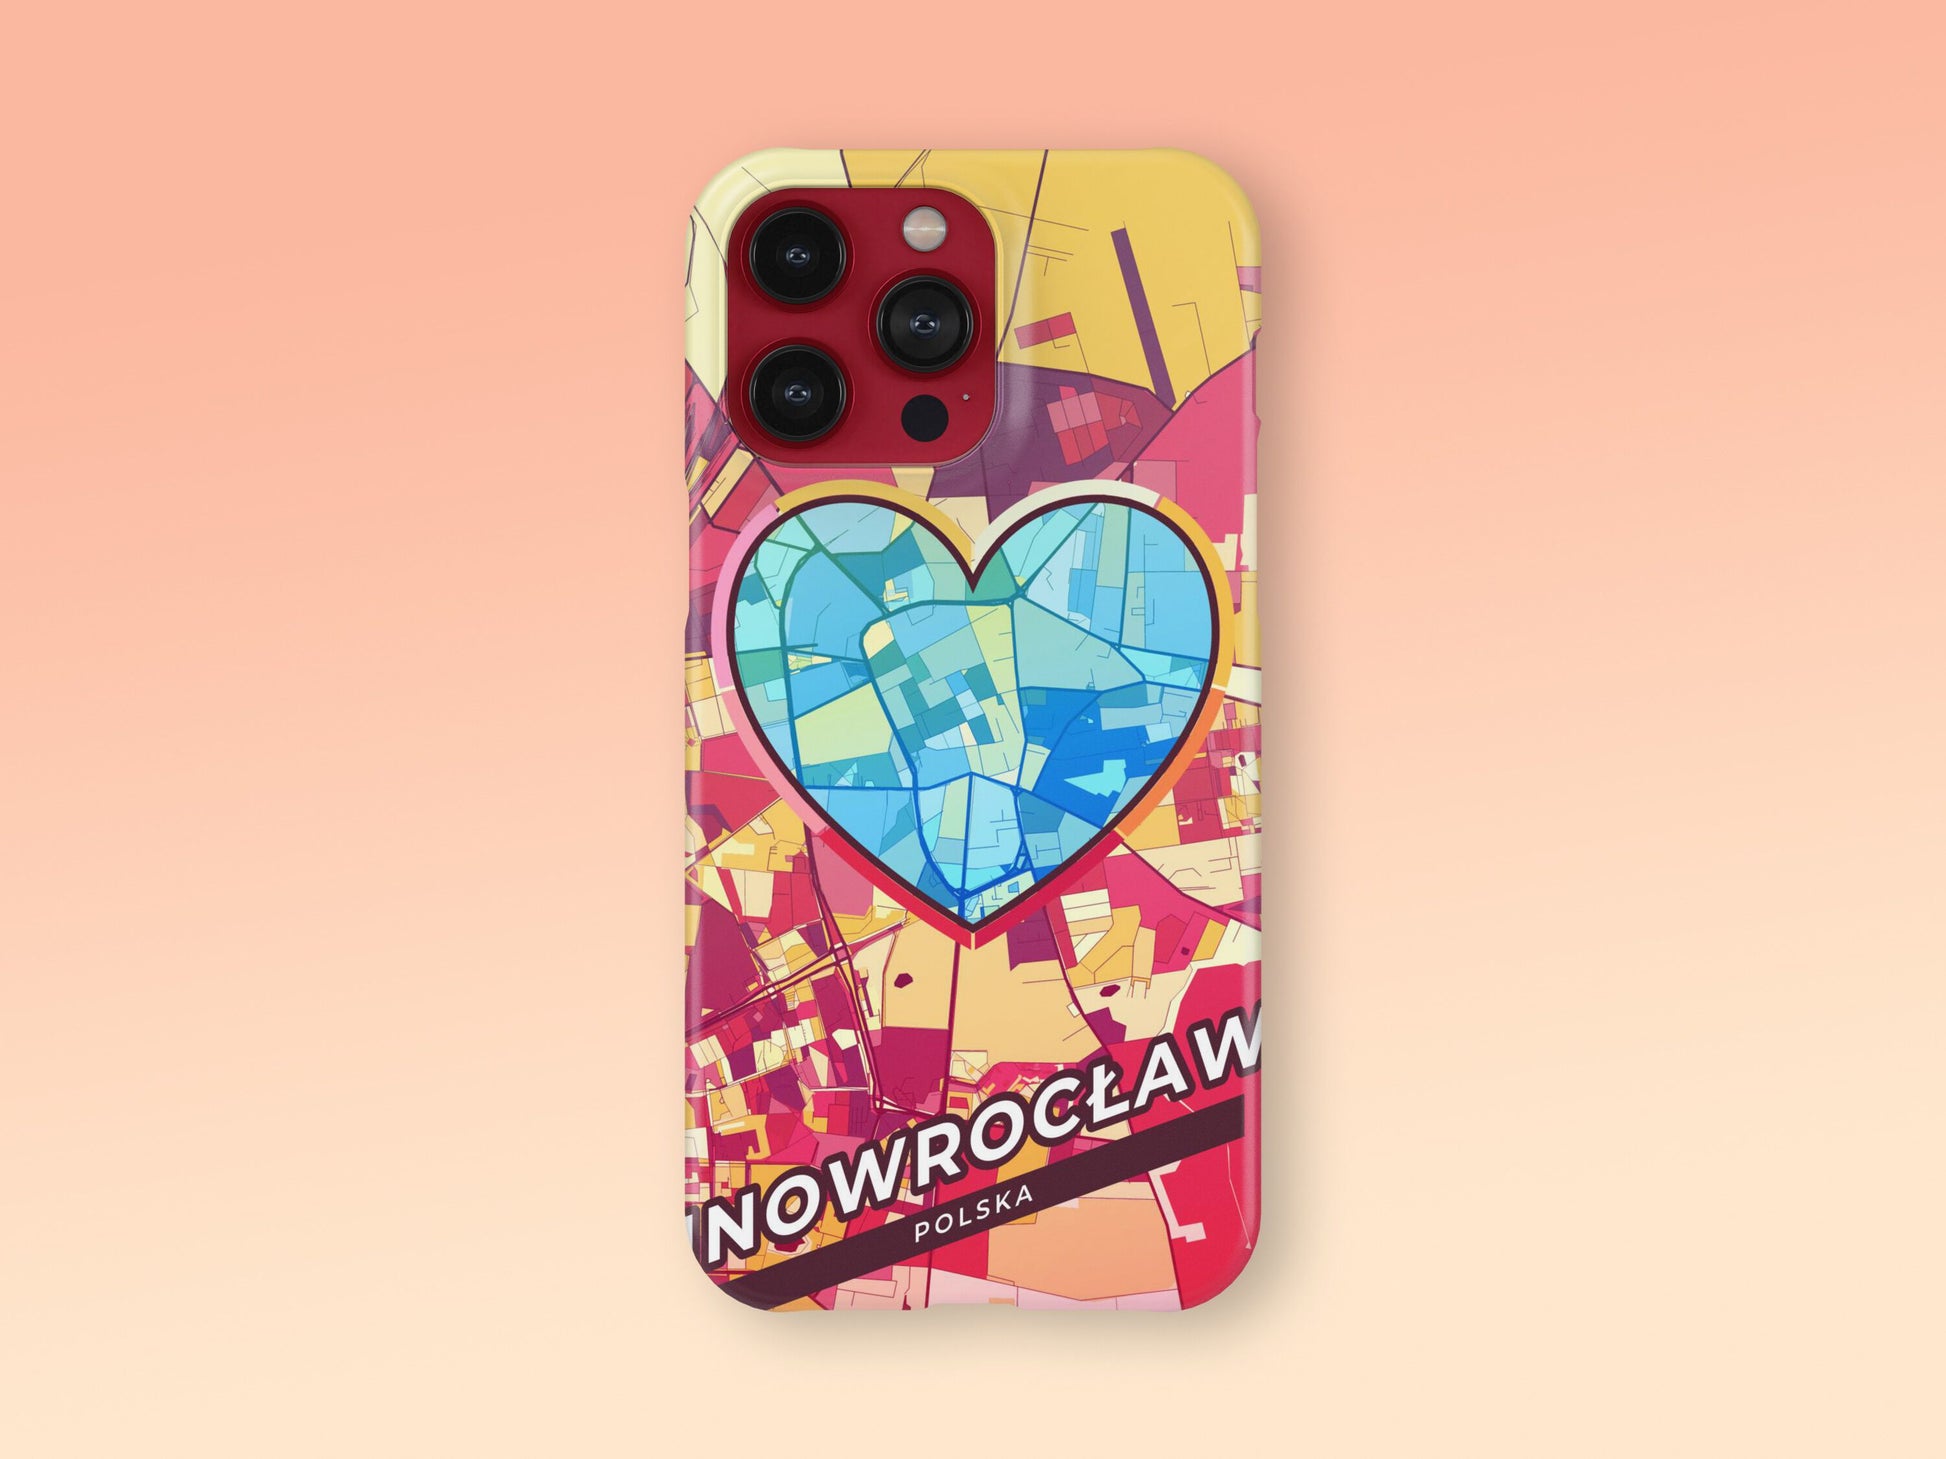 Inowrocław Poland slim phone case with colorful icon. Birthday, wedding or housewarming gift. Couple match cases. 2